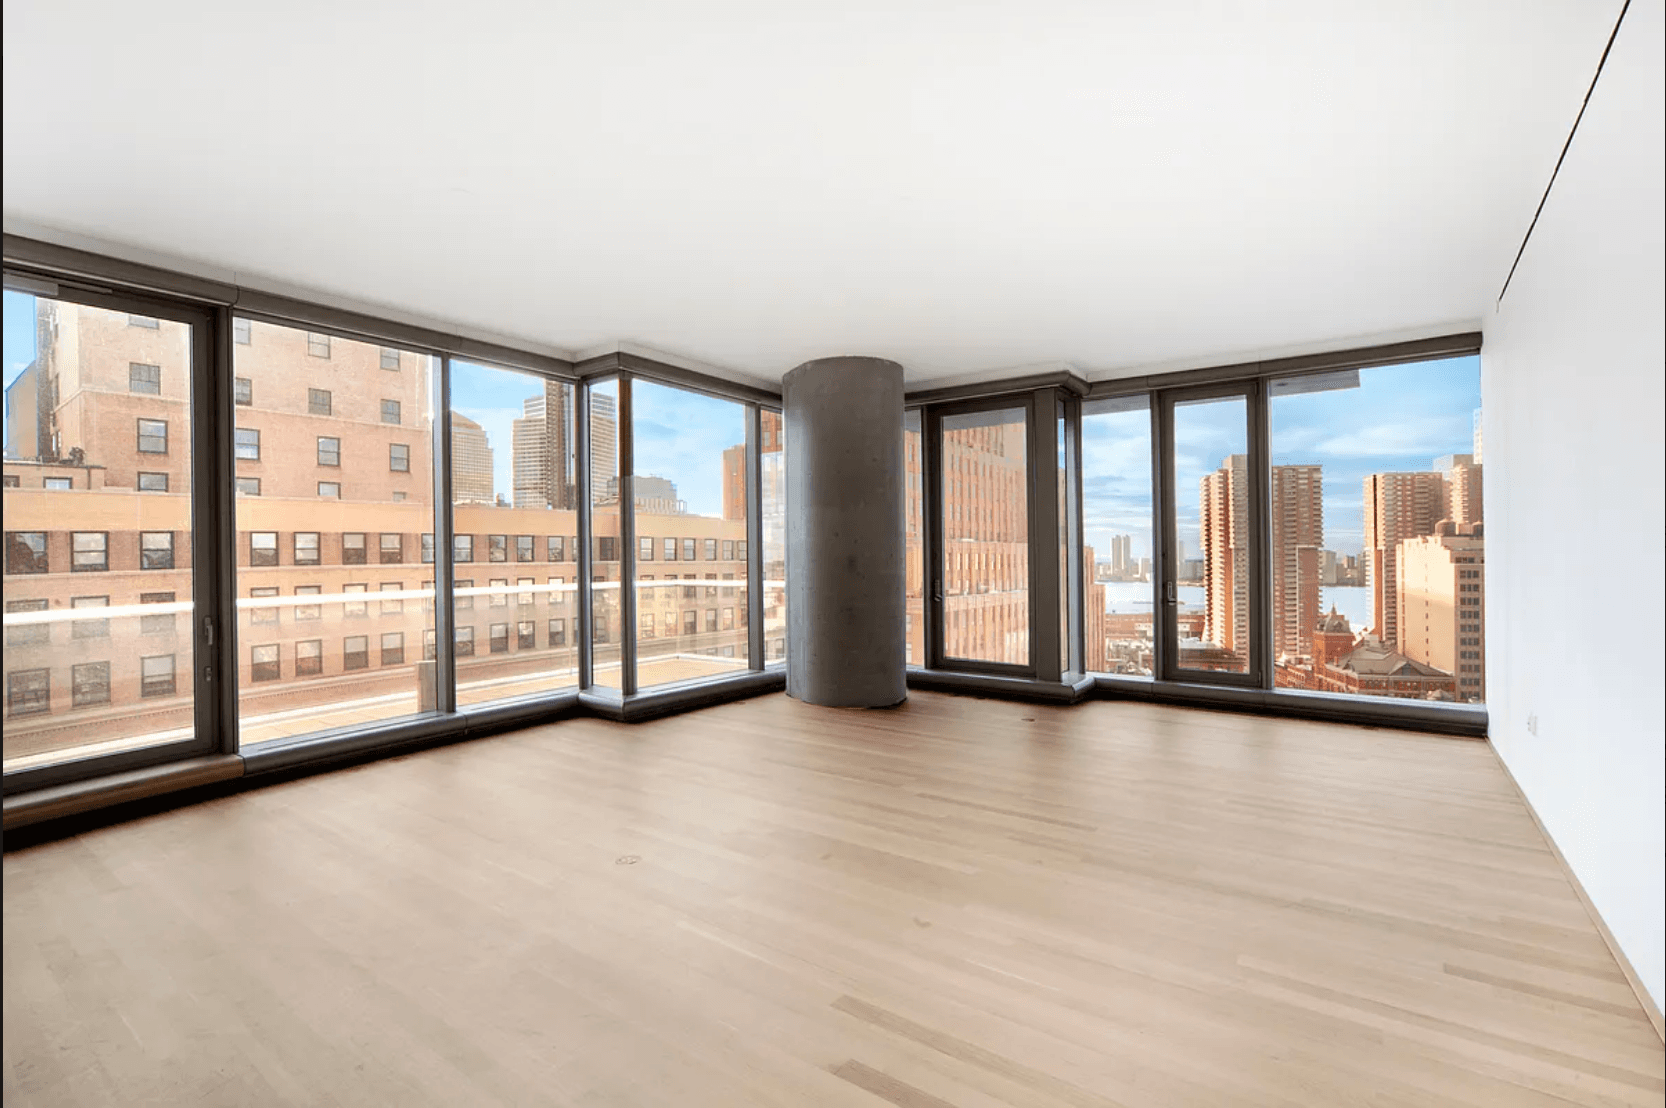 Luxury 2 Bedroom Tribeca Loft with Panoramic Glass NYC Views and Two Large Terraces